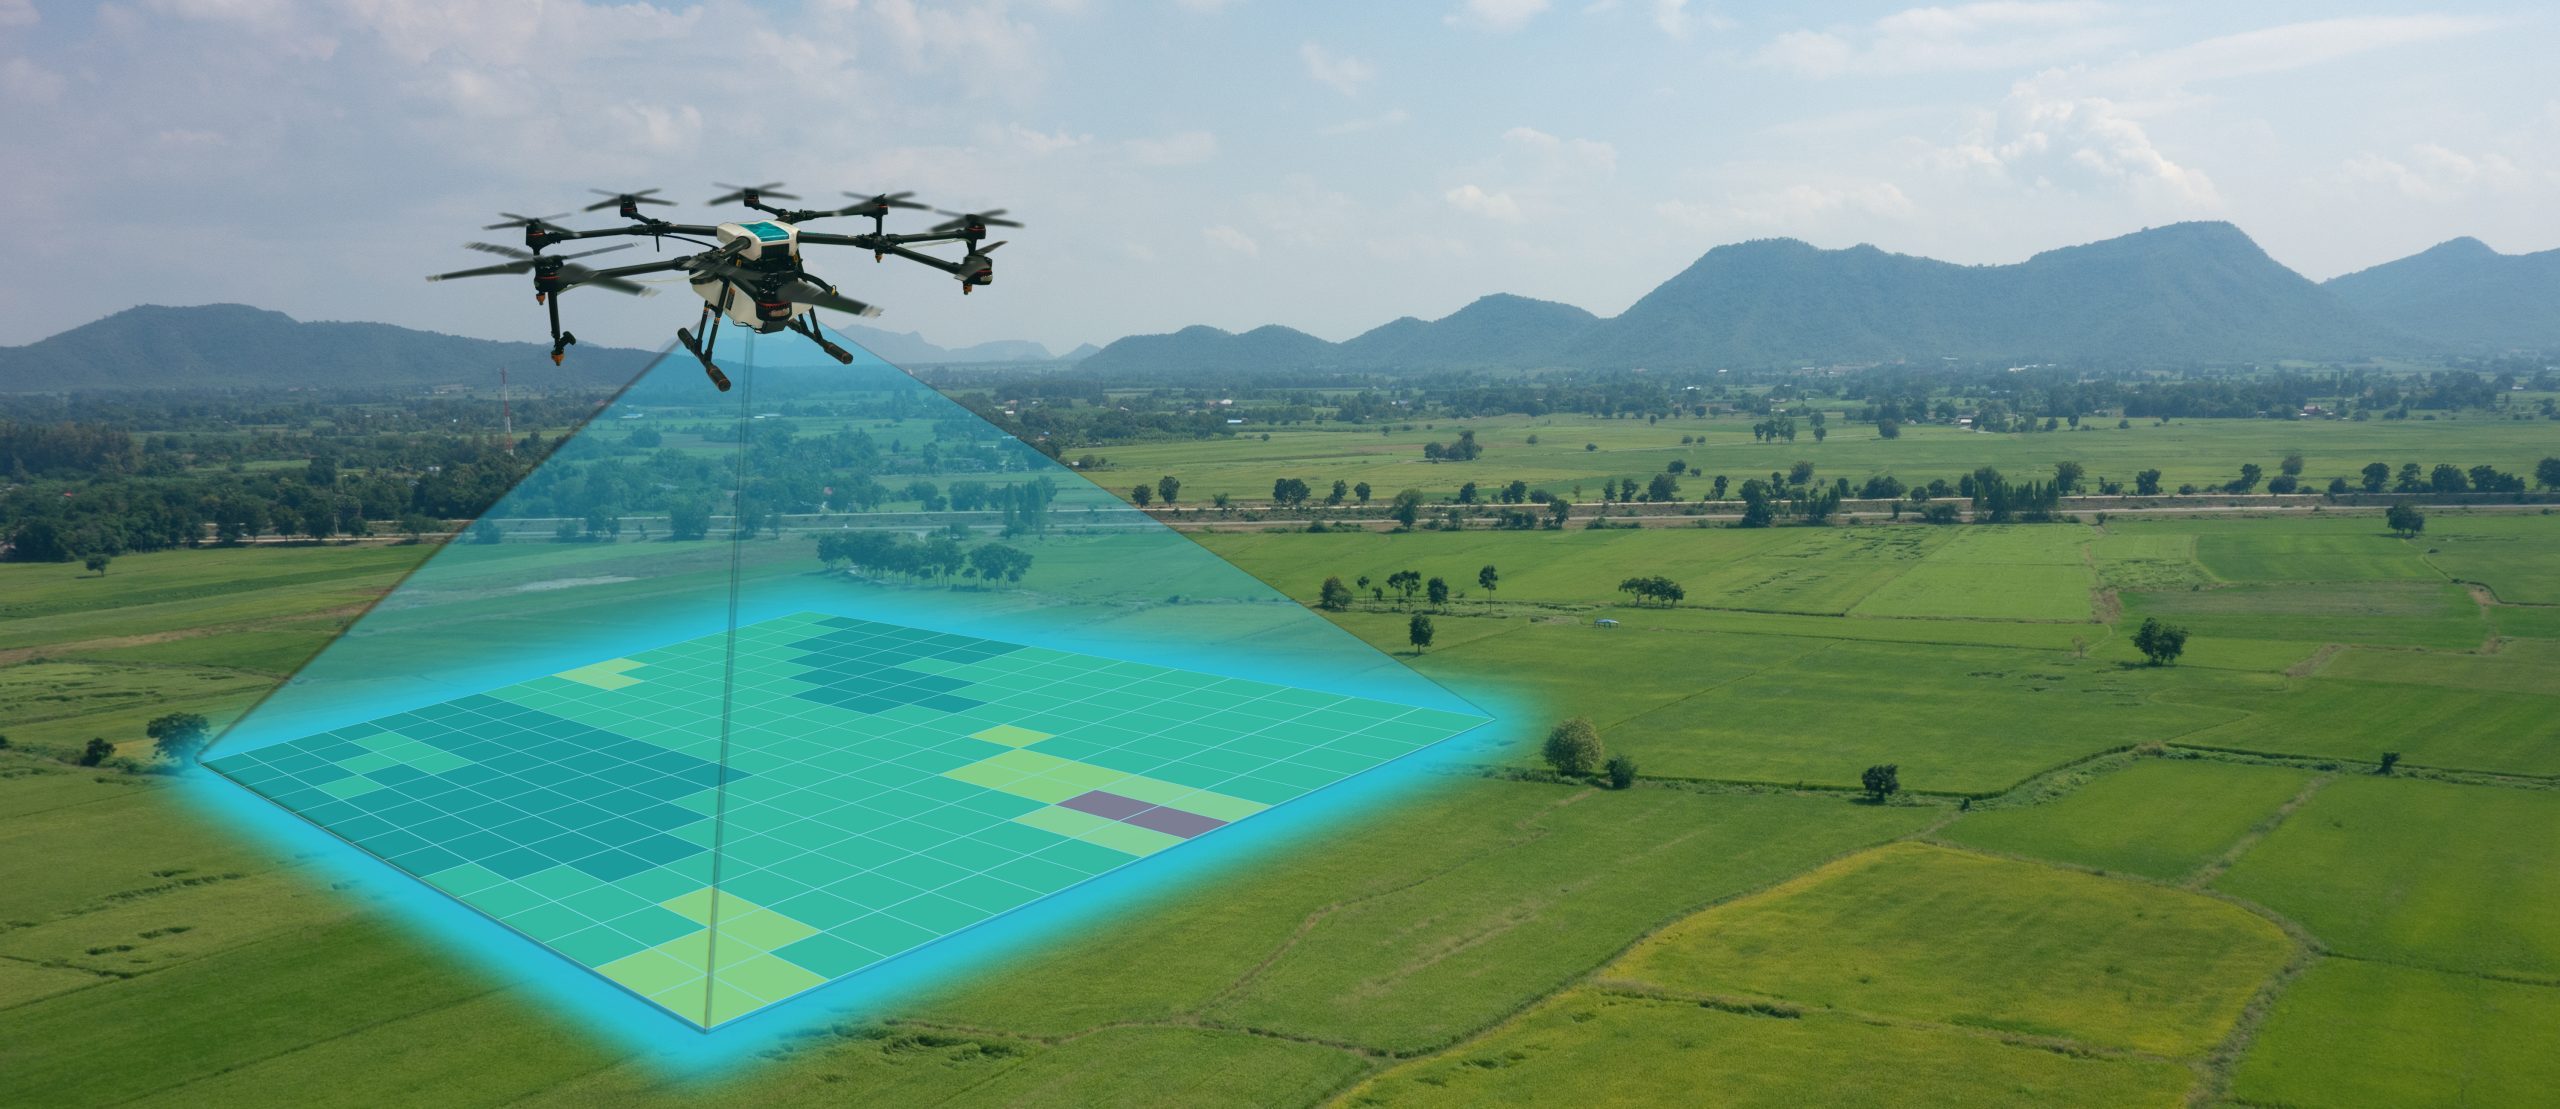 Drone being used for land surveying and mapping the ground below it. Shows lasers from drone on the ground in a square format